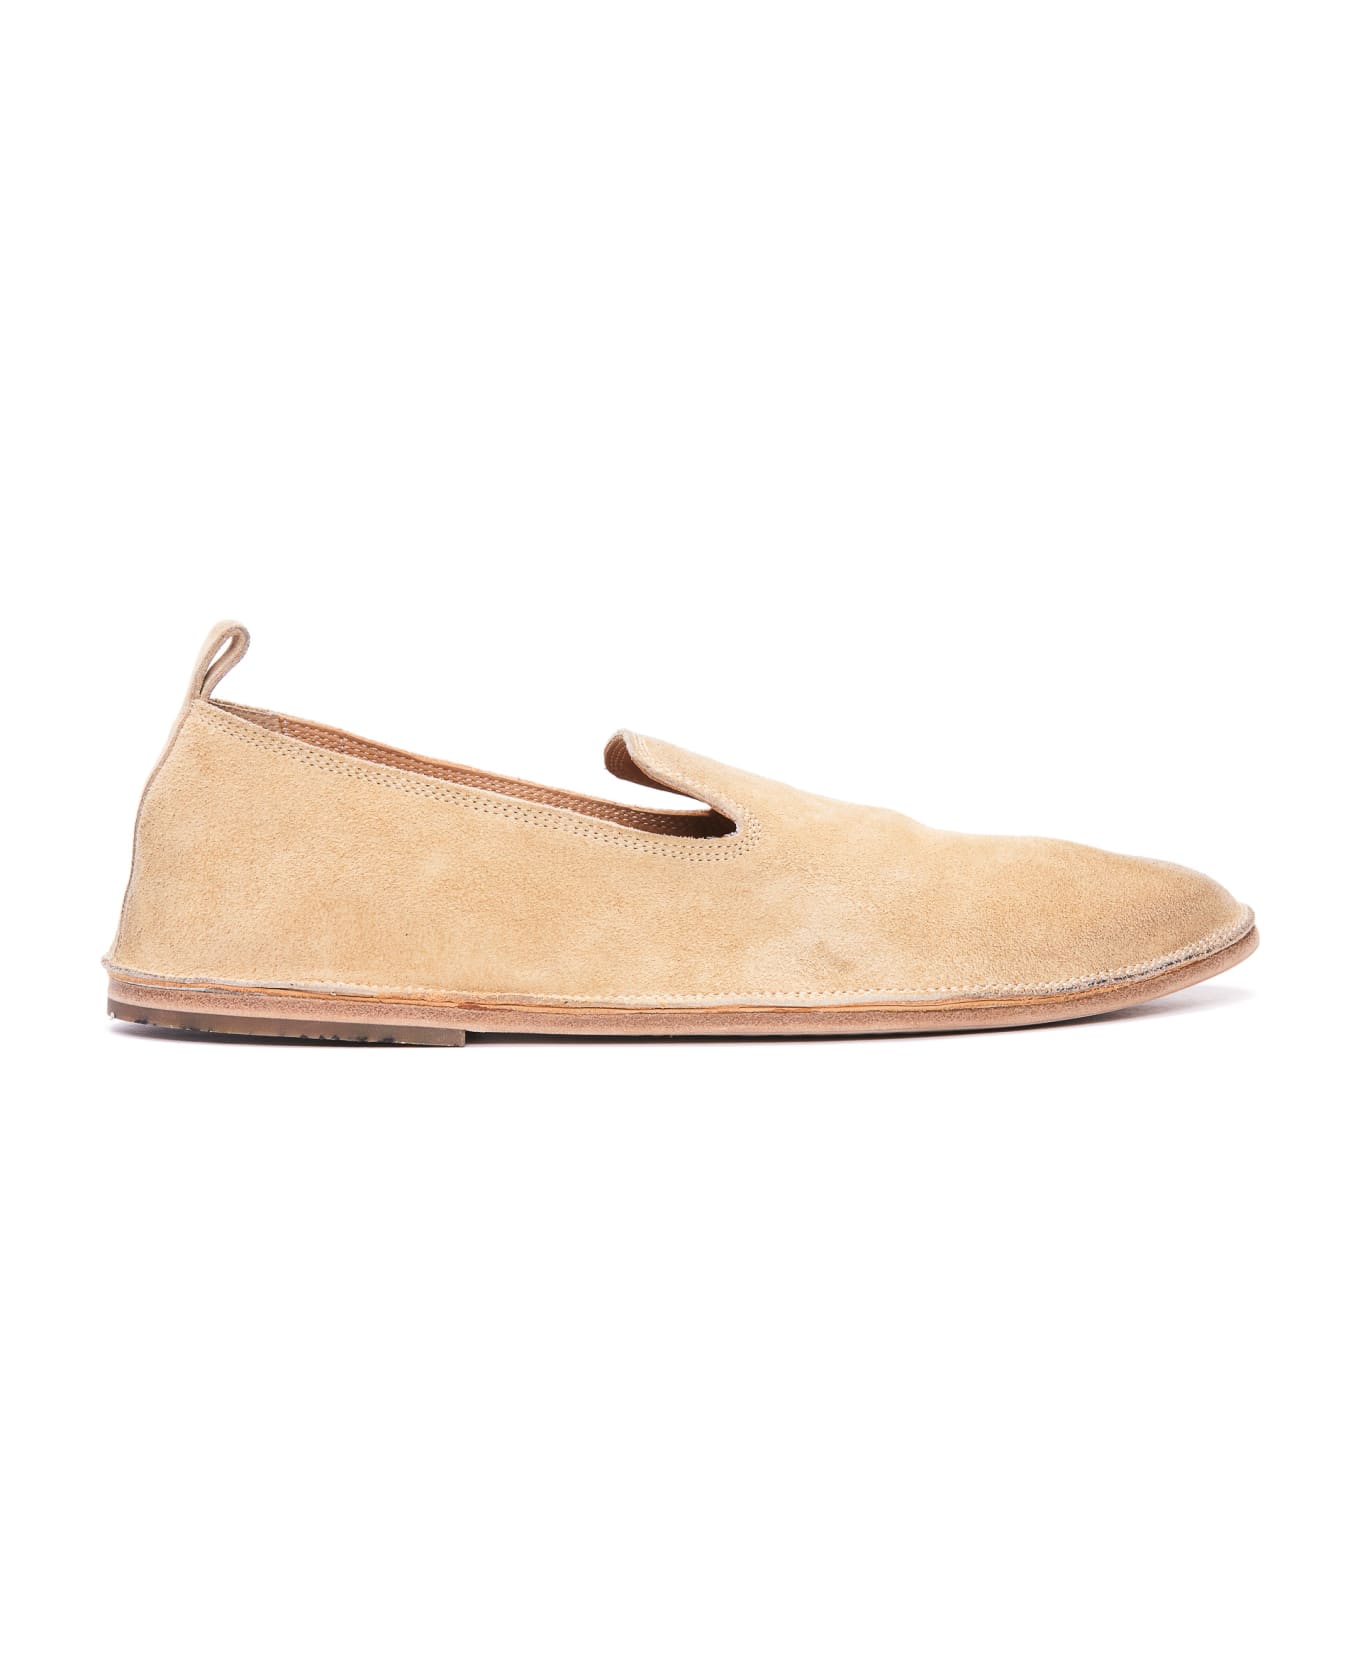 Marsell Strasacco Loafers - Beige